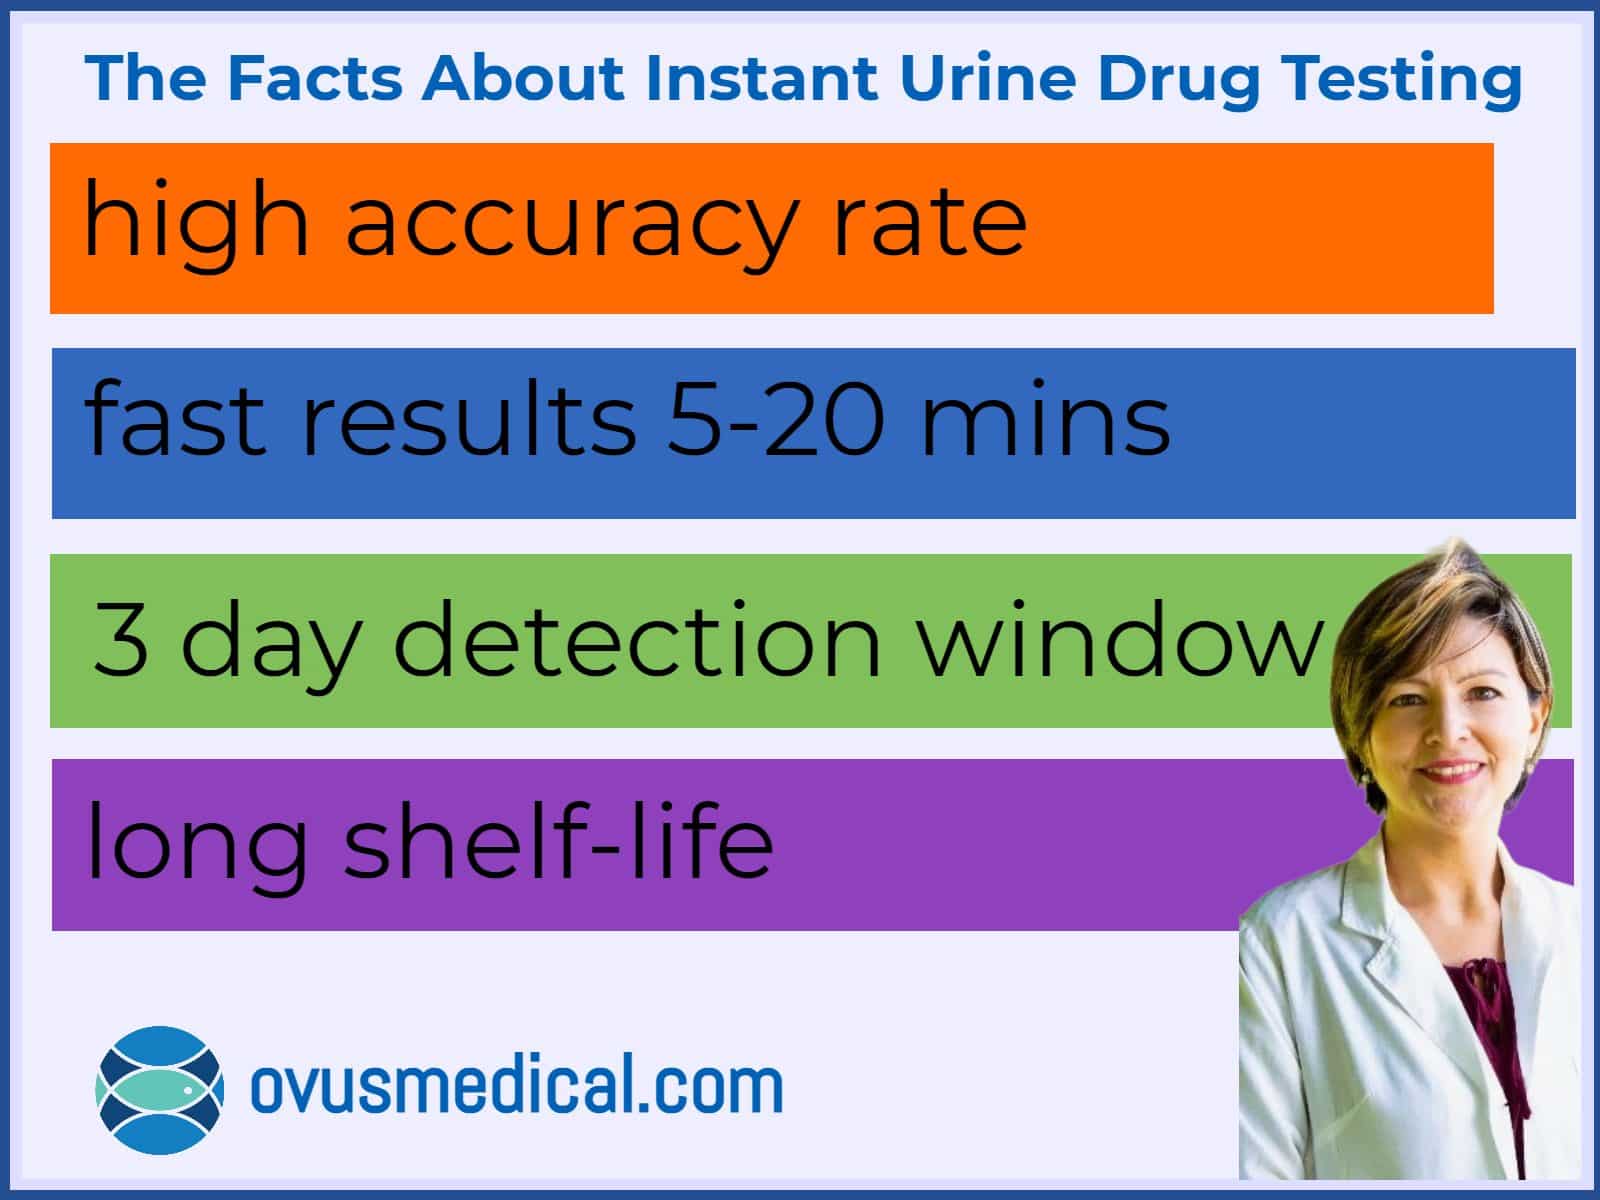 ovus medical The Facts About Instant Urine Drug Testing